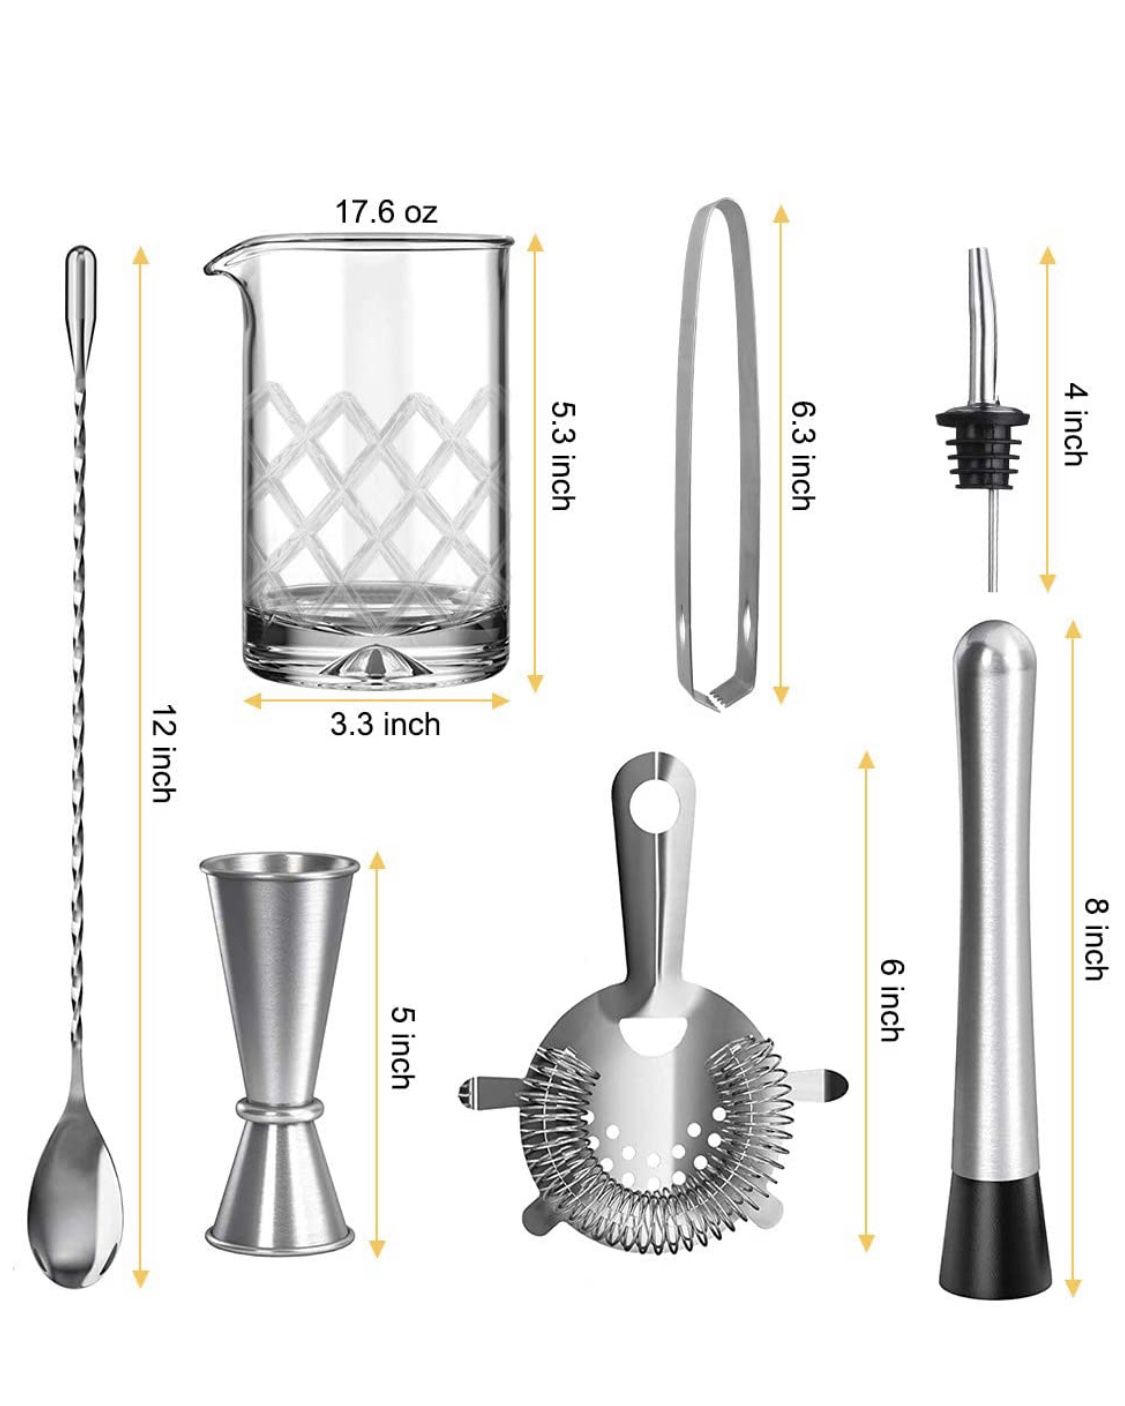 Brand new! Cocktail Mixing Glass Kit, 9 Piece Home Bar Set - Drink Mixer with 18oz 500ml Lead-Free Glass, Cocktail Strainer, Muddler, Jigger, Profess